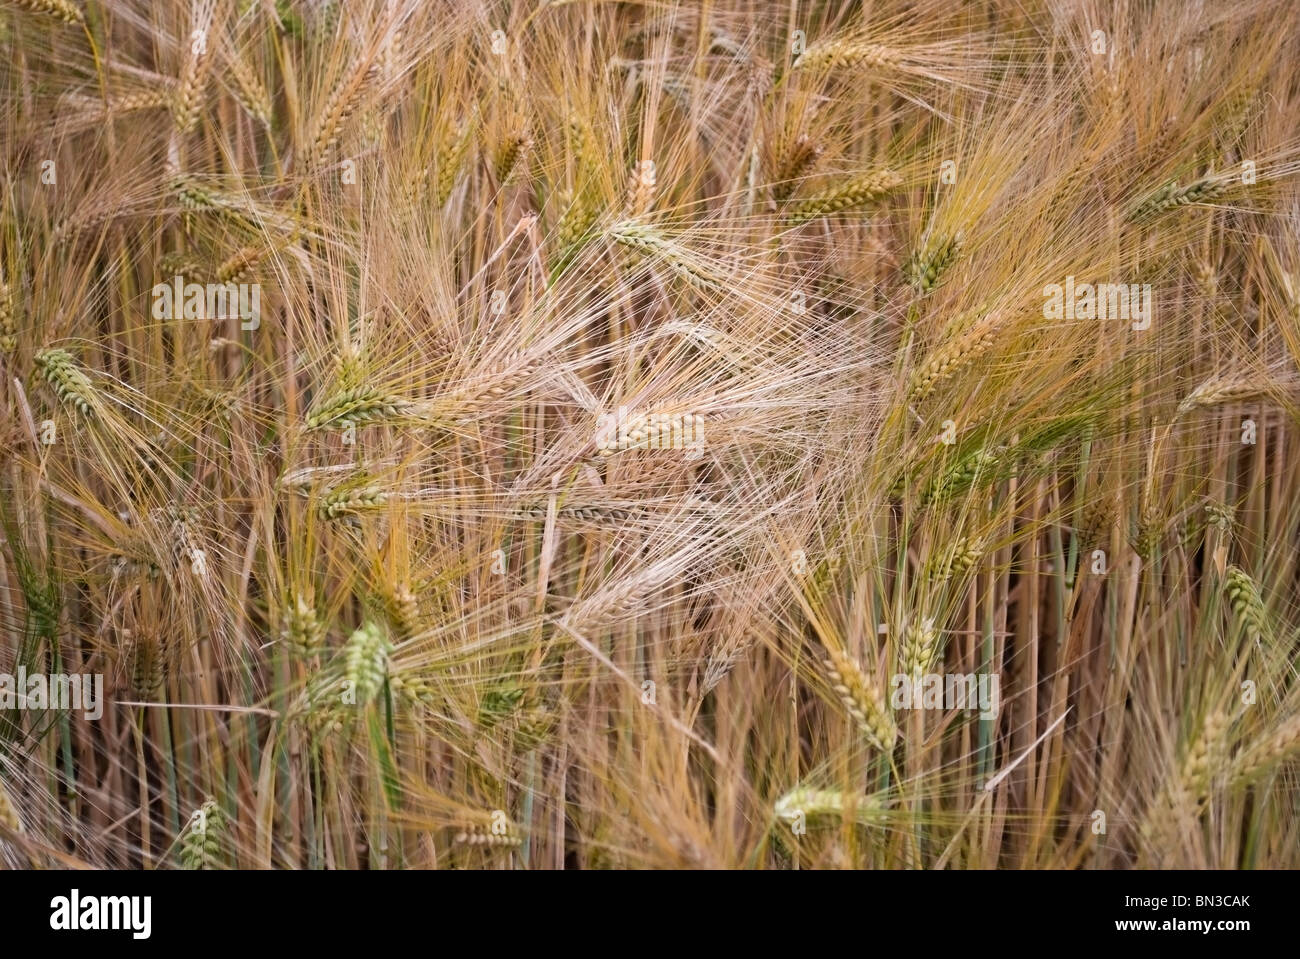 Landscape photograph of a durum wheat field in Giessen, Germany Stock Photo